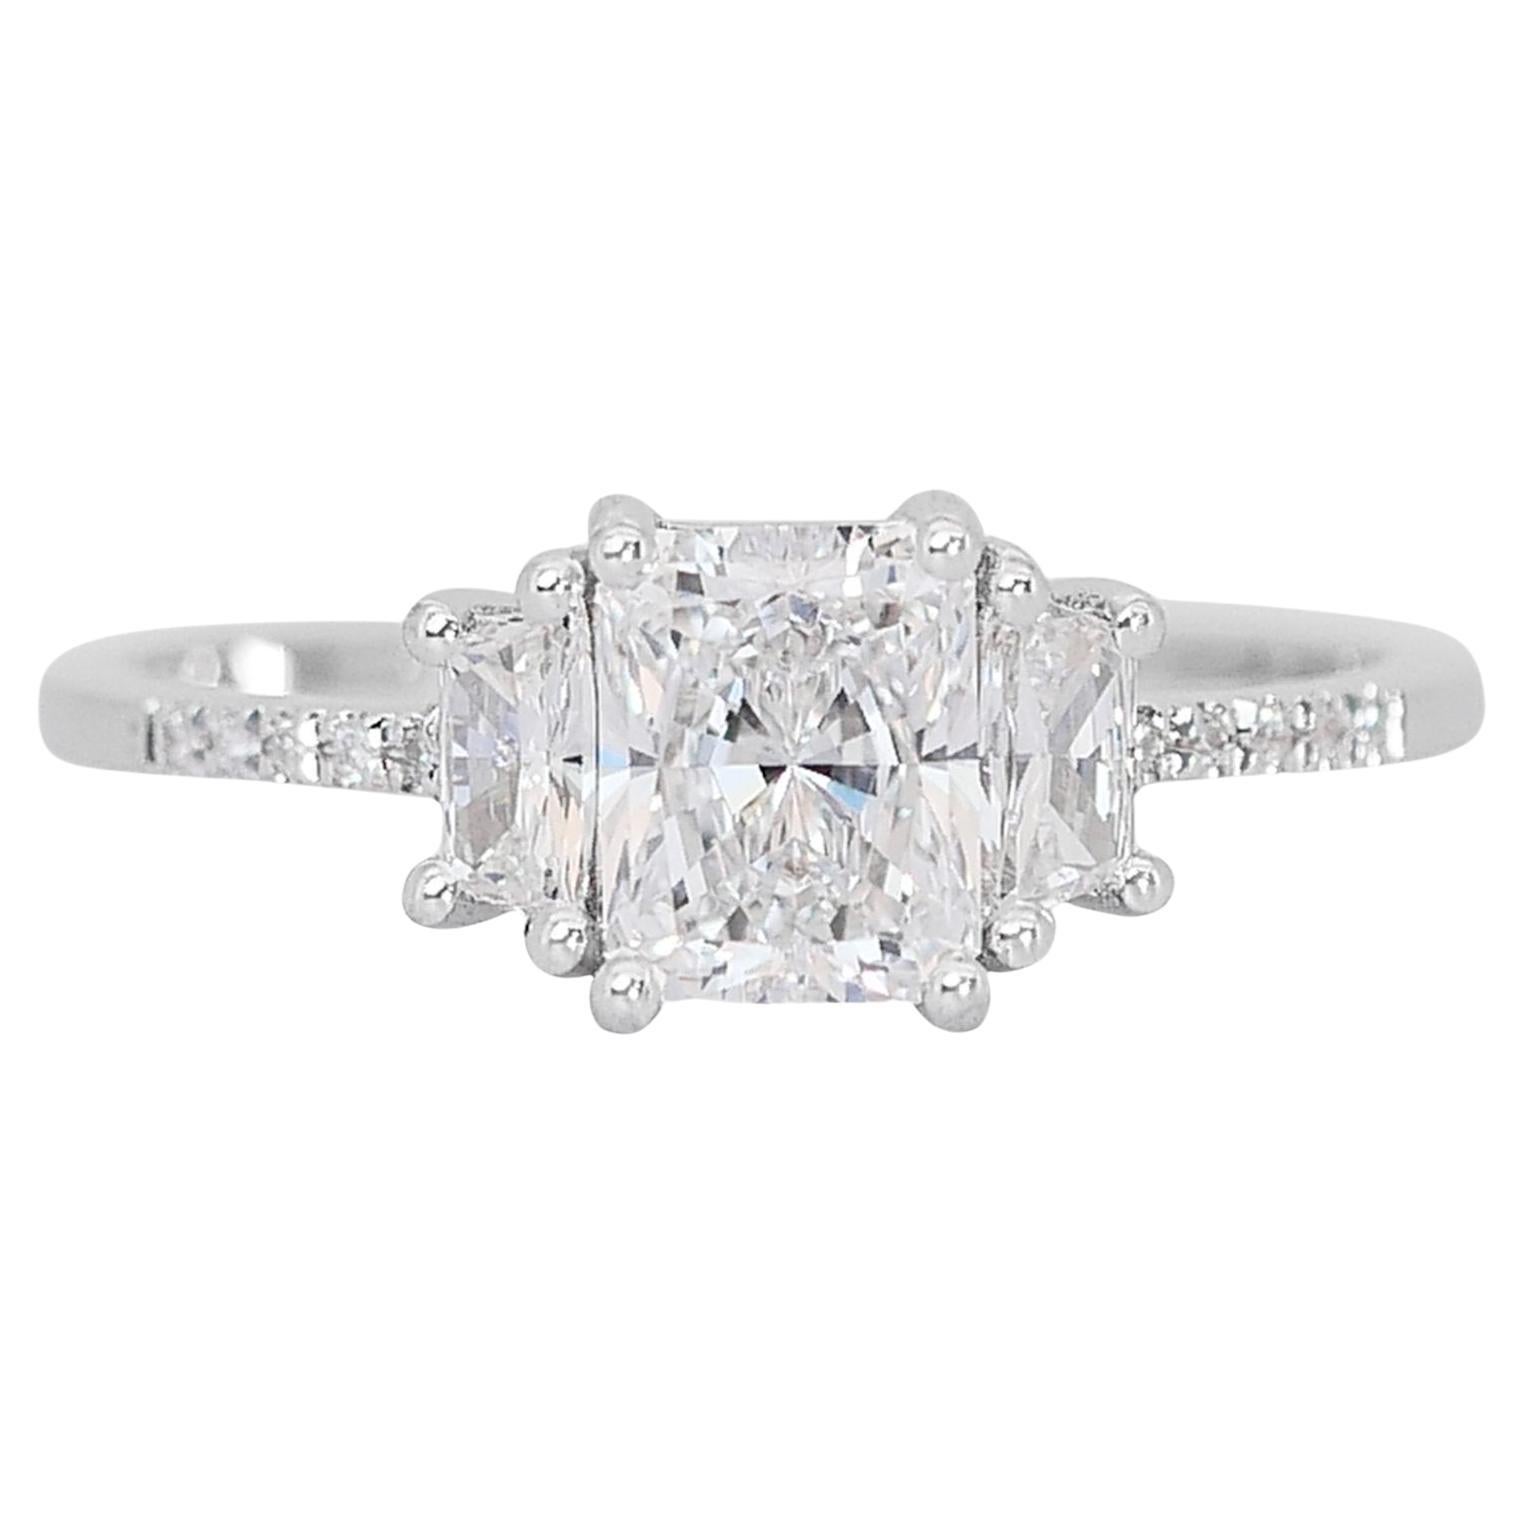 Dazzling 1.32ct Diamond 3-Stone Ring in 18K White Gold - GIA Certified For Sale